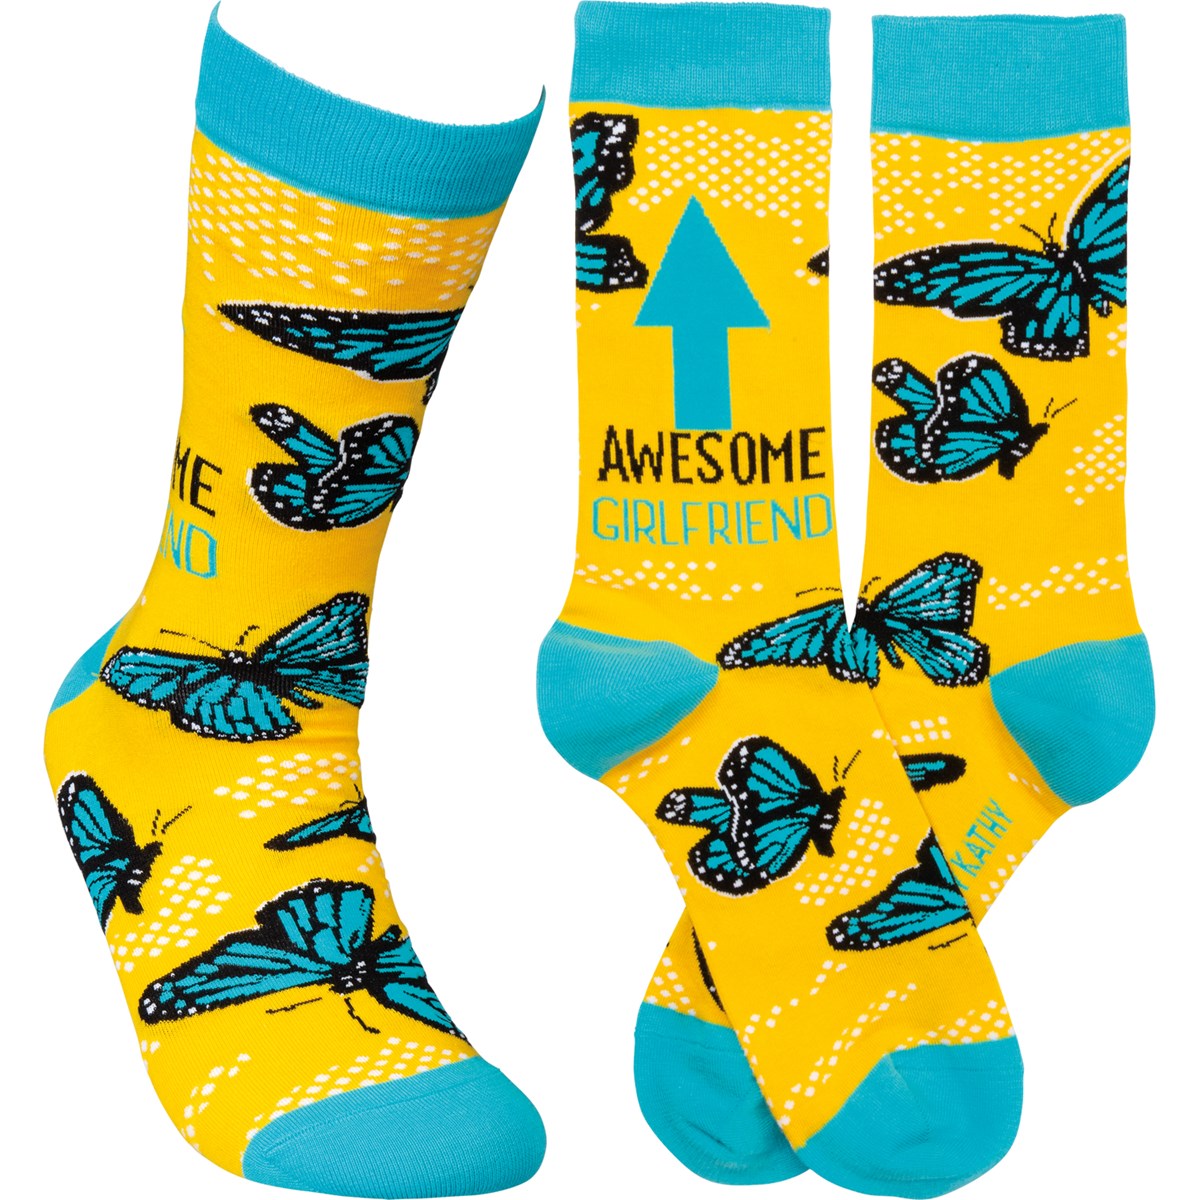 Socks - Awesome Girlfriend - One Size Fits Most - Cotton, Nylon, Spandex